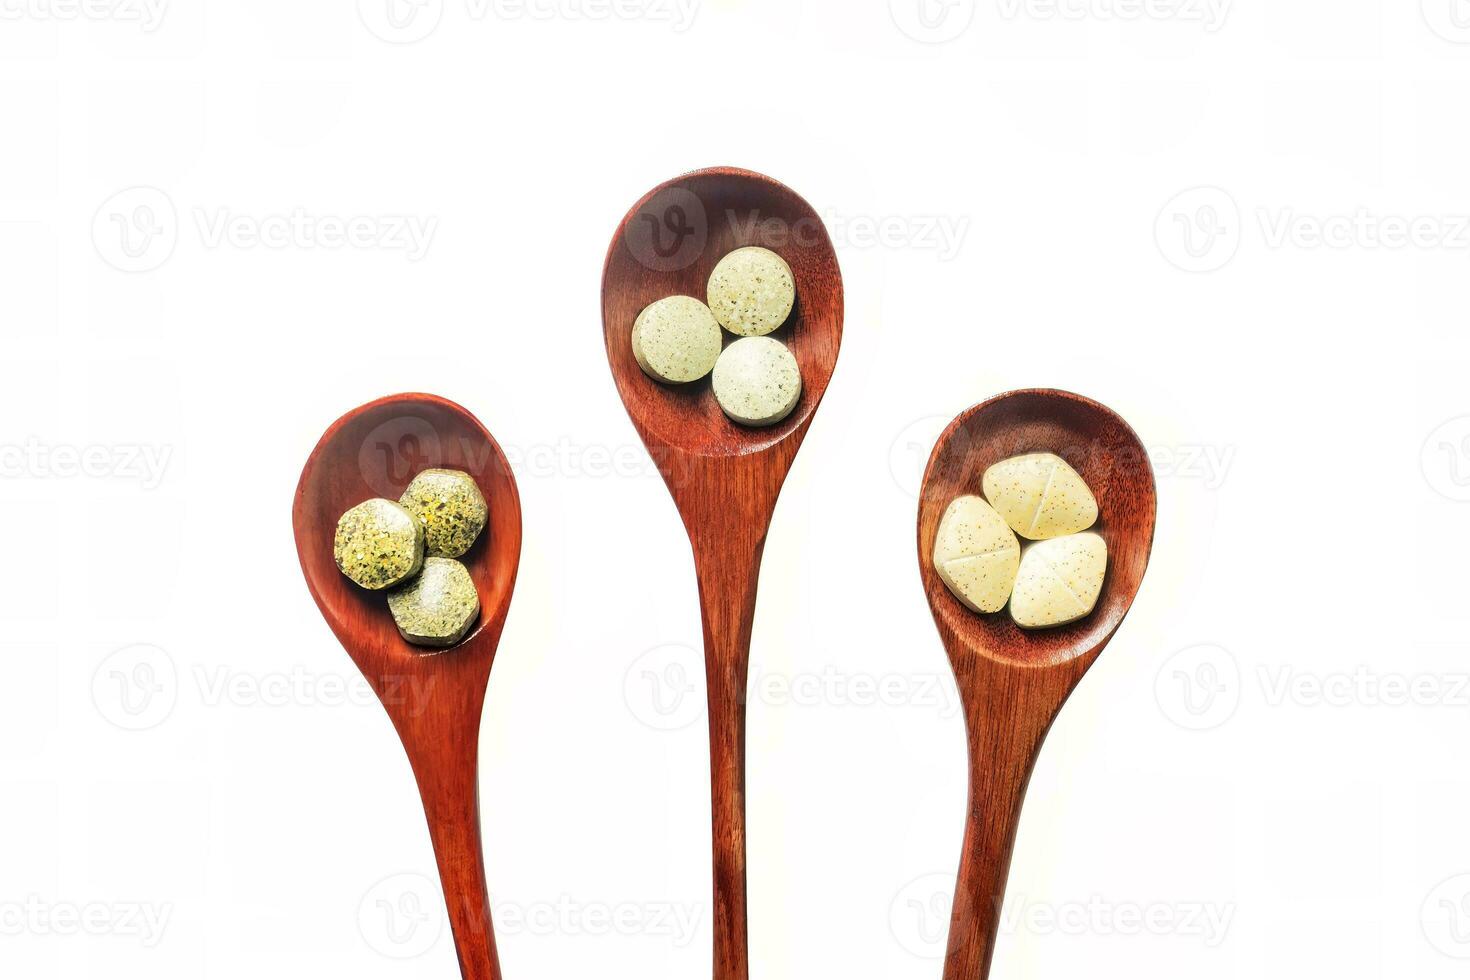 Multivitamins, multimineral, and phytonutrients are pressed tablets as nutritional supplements placed on a wooden spoon with isolated on white background. photo